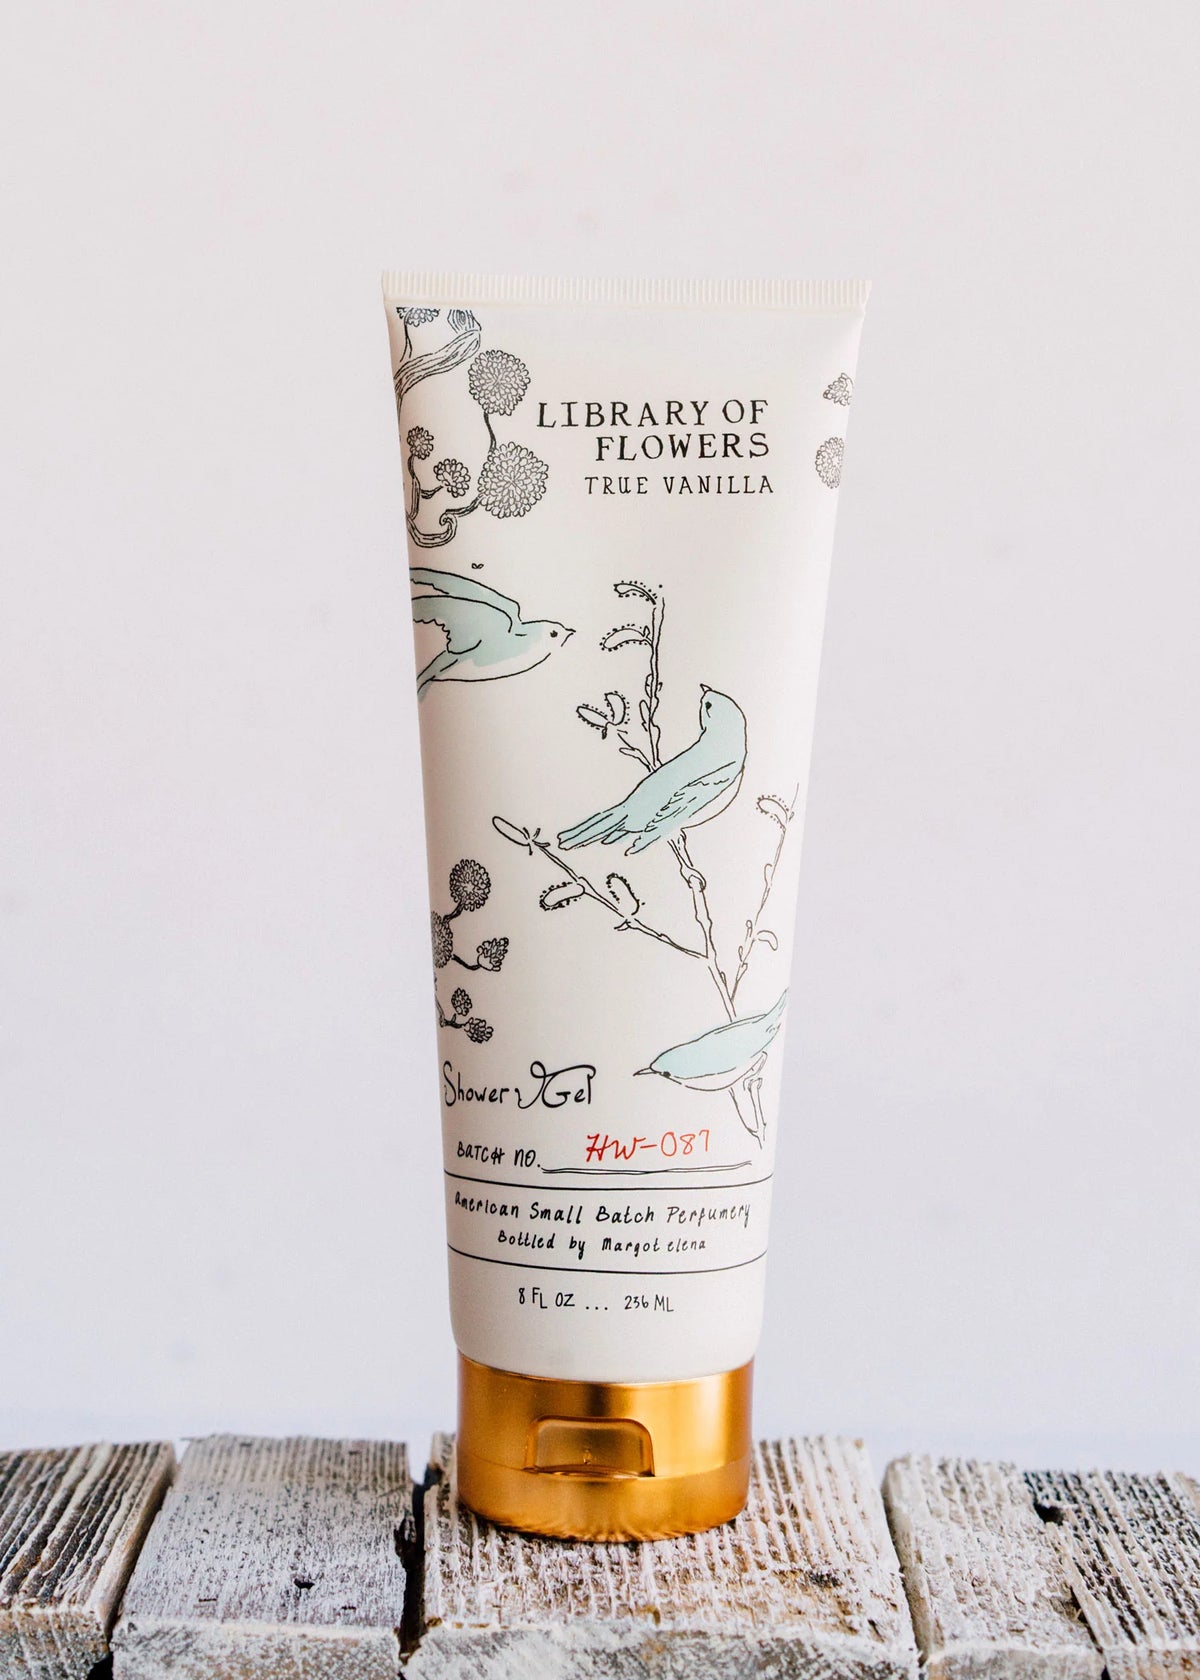 A tube of Margot Elena's Library of Flowers True Vanilla Shower Gel, enriched with Jojoba Oil, featuring an elegant floral and bird design, standing upright on a wooden surface against a white background.